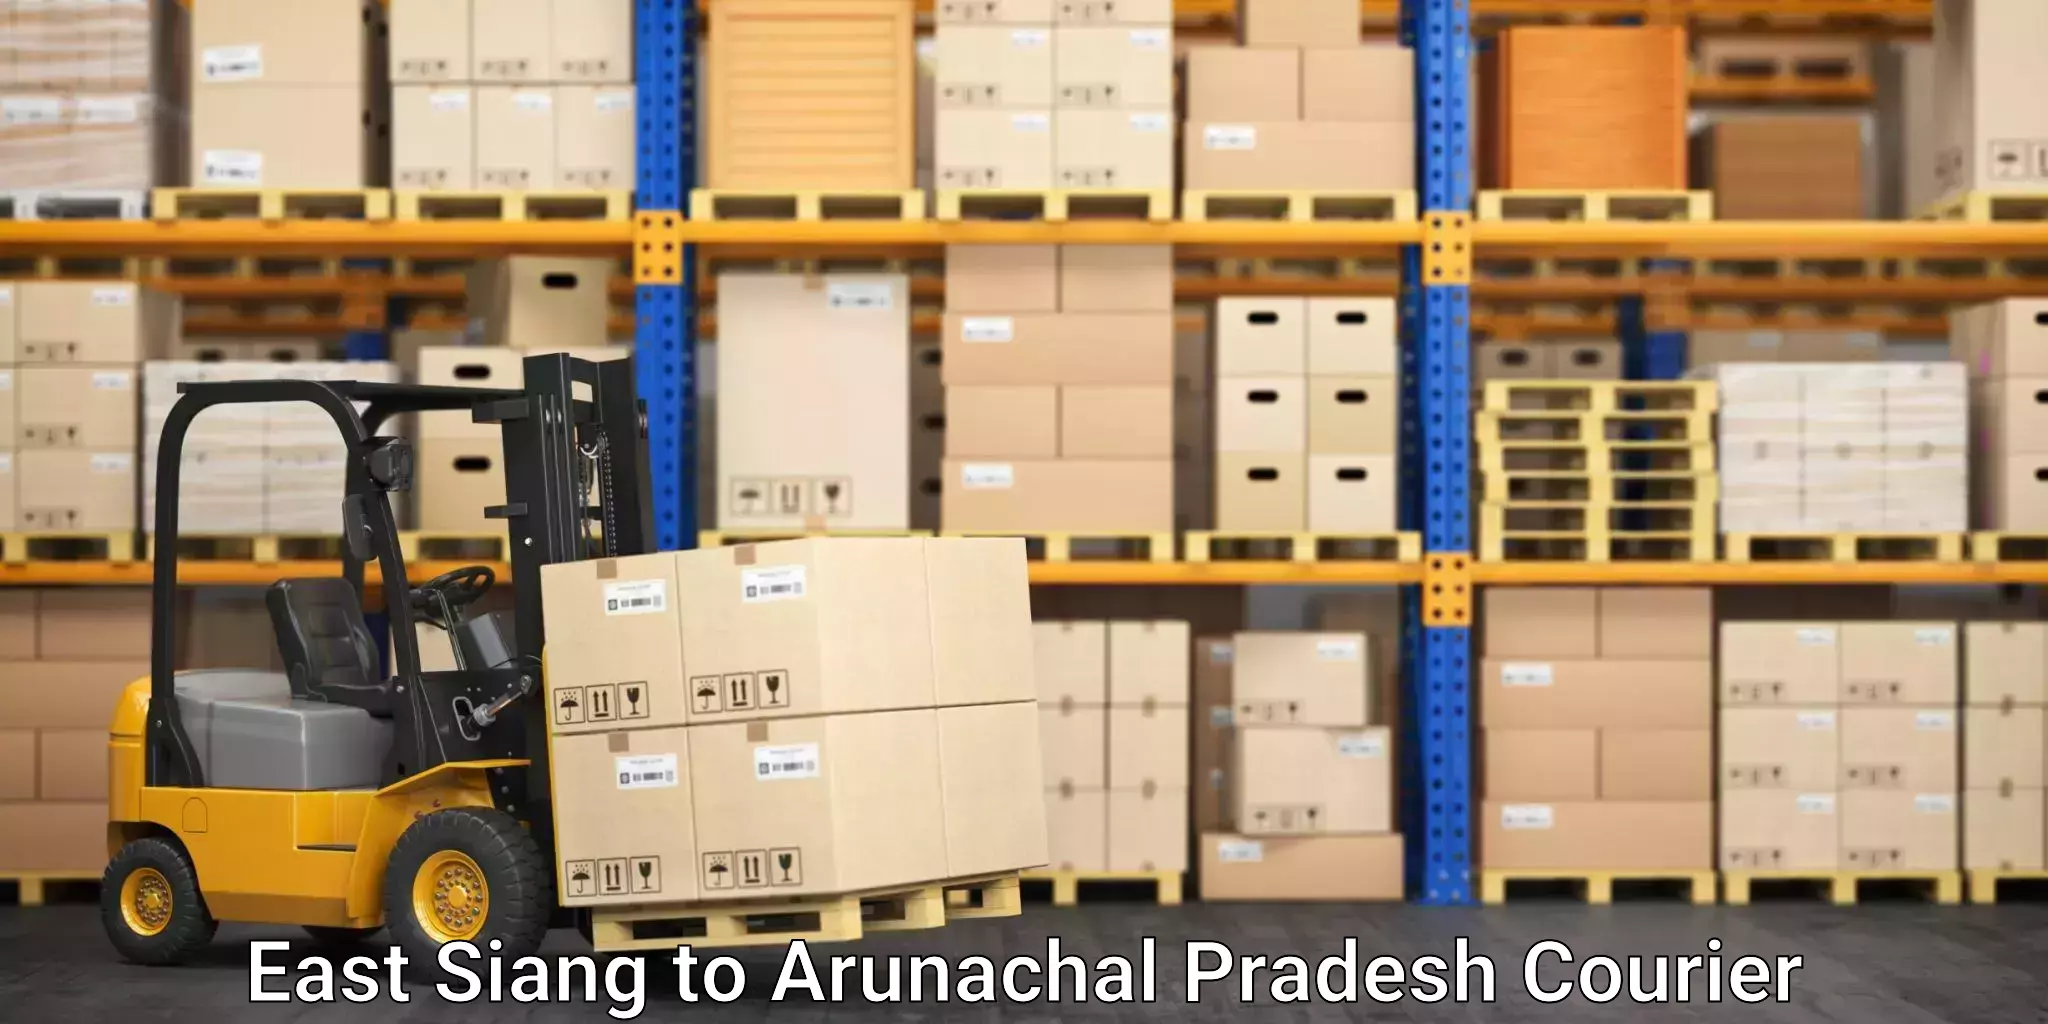 High-speed parcel service in East Siang to Arunachal Pradesh